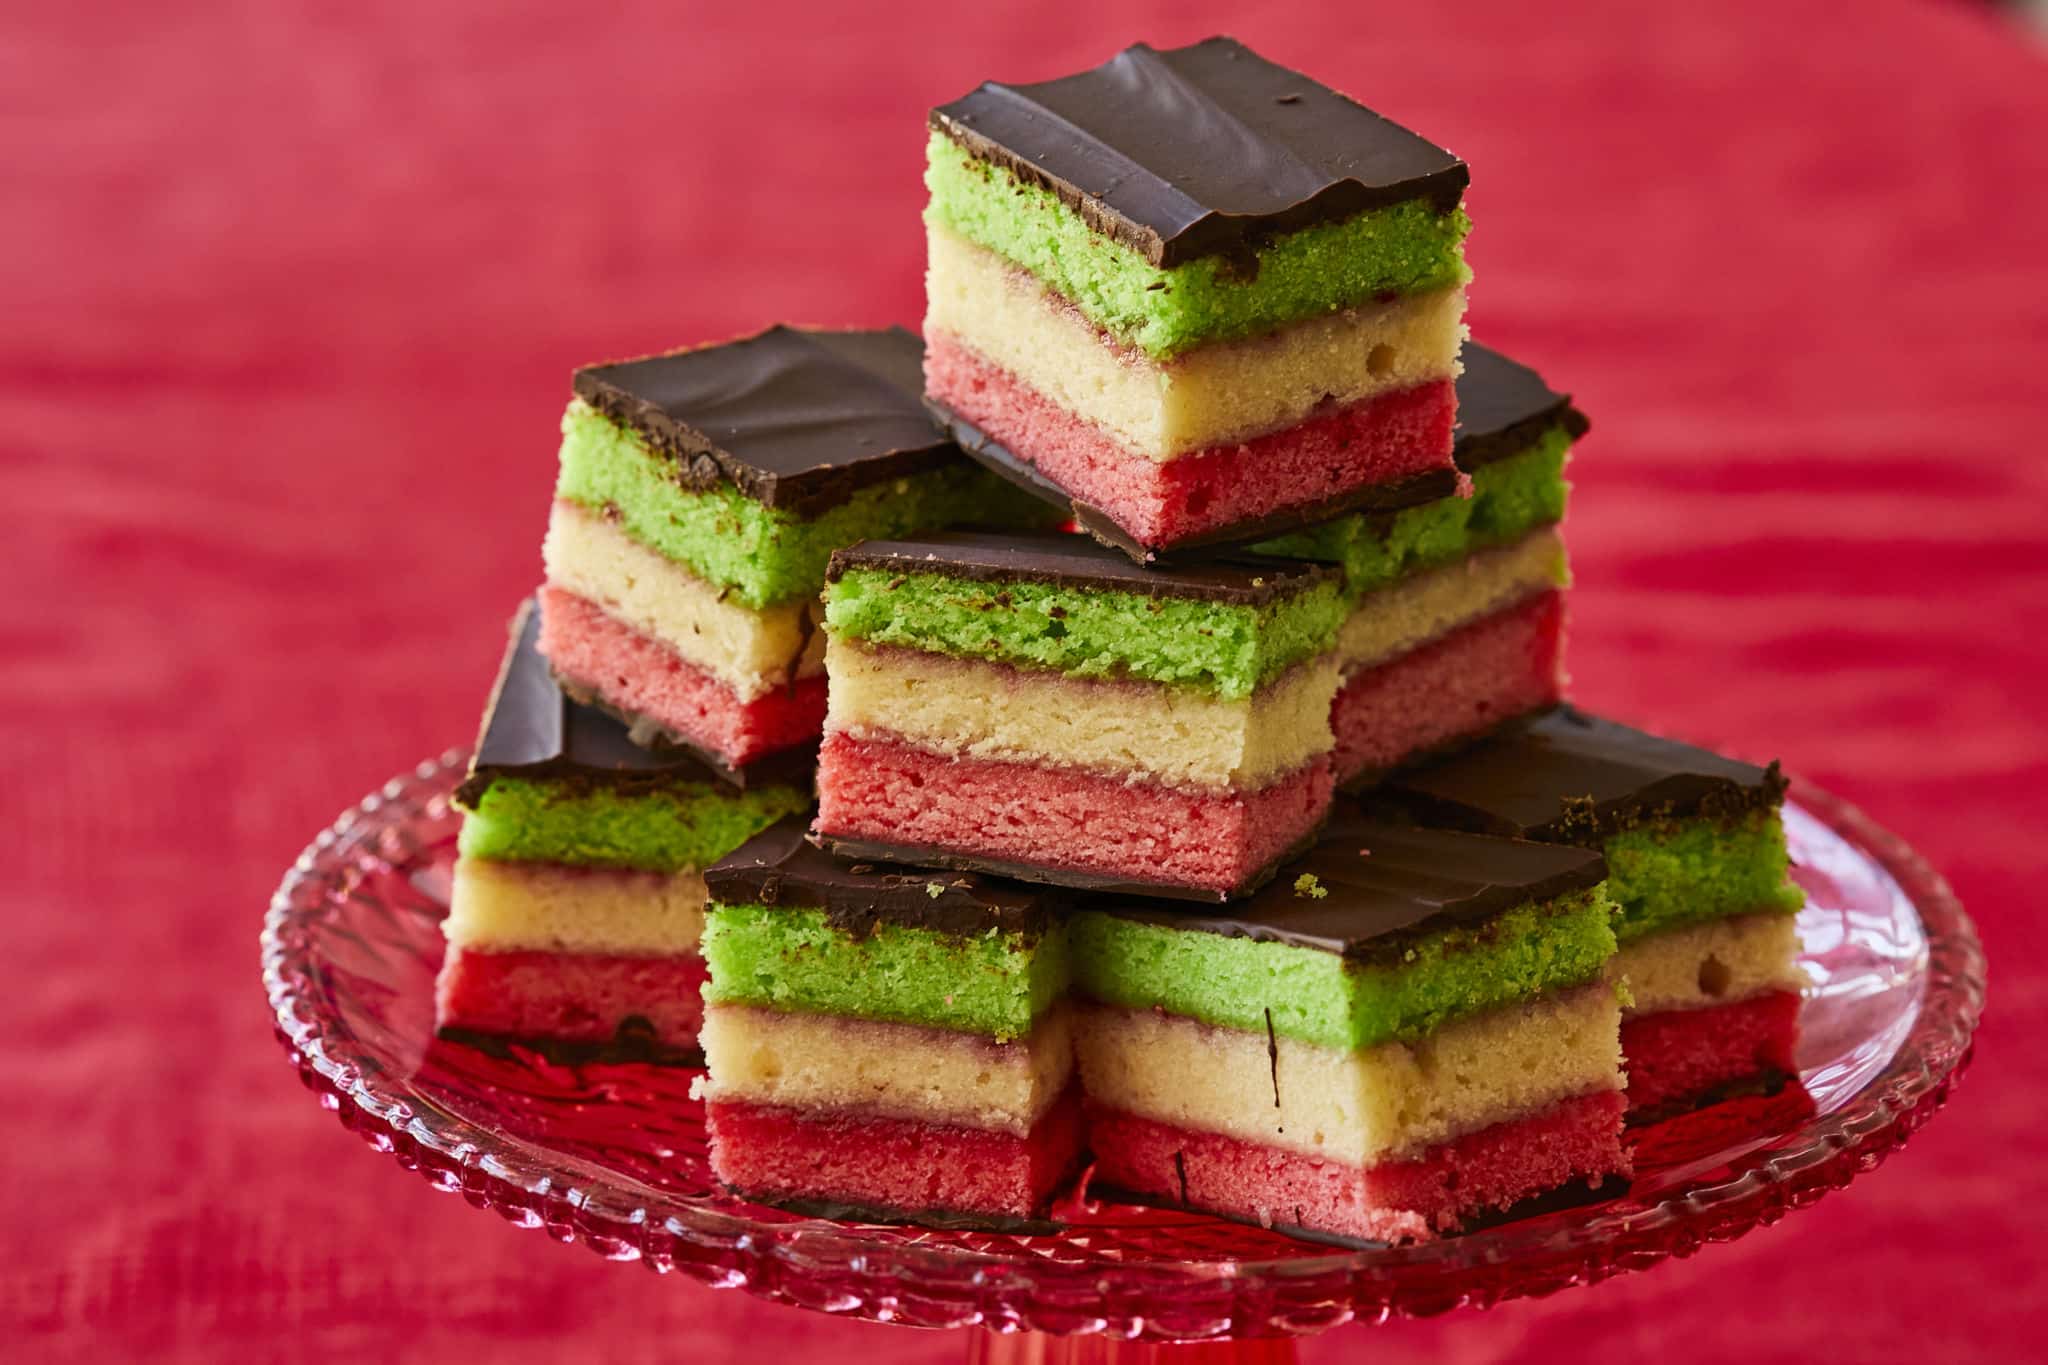 Homemade Italian Rainbow Cookies are stacked on a tray. The tricolor cookies are pink, white, and green, and coated in semi-sweet chocolate.